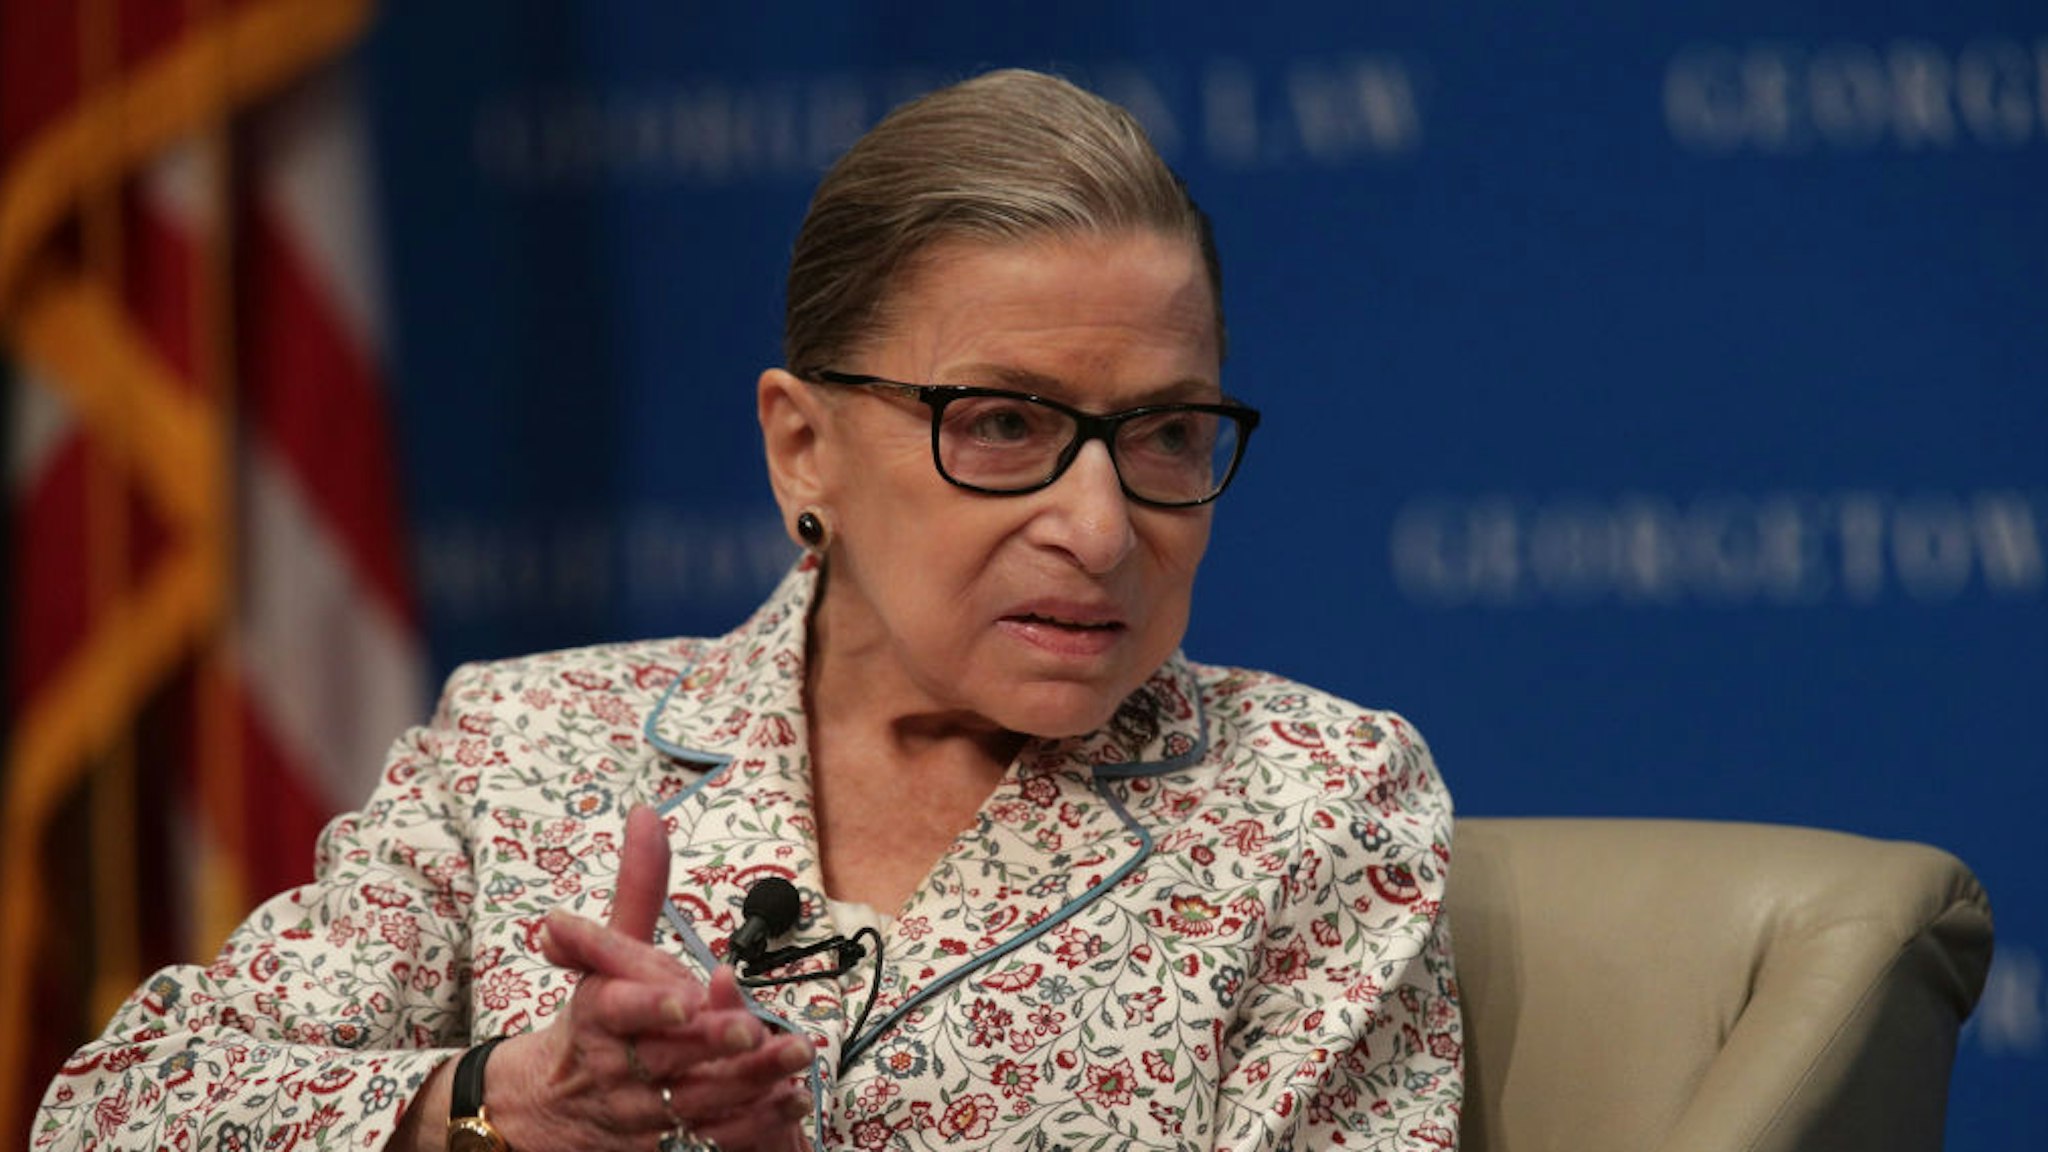 U.S. Supreme Court Associate Justice Ruth Bader Ginsburg participates in a discussion at Georgetown University Law Center July 2, 2019 in Washington, DC. The Georgetown University Law Center‚Äôs Supreme Court Institute held a discussion on "U.S. Supreme Court Justice Ruth Bader Ginsburg: A Legacy of Gender Equality in Life and Law." (Photo by Alex Wong/Getty Images)